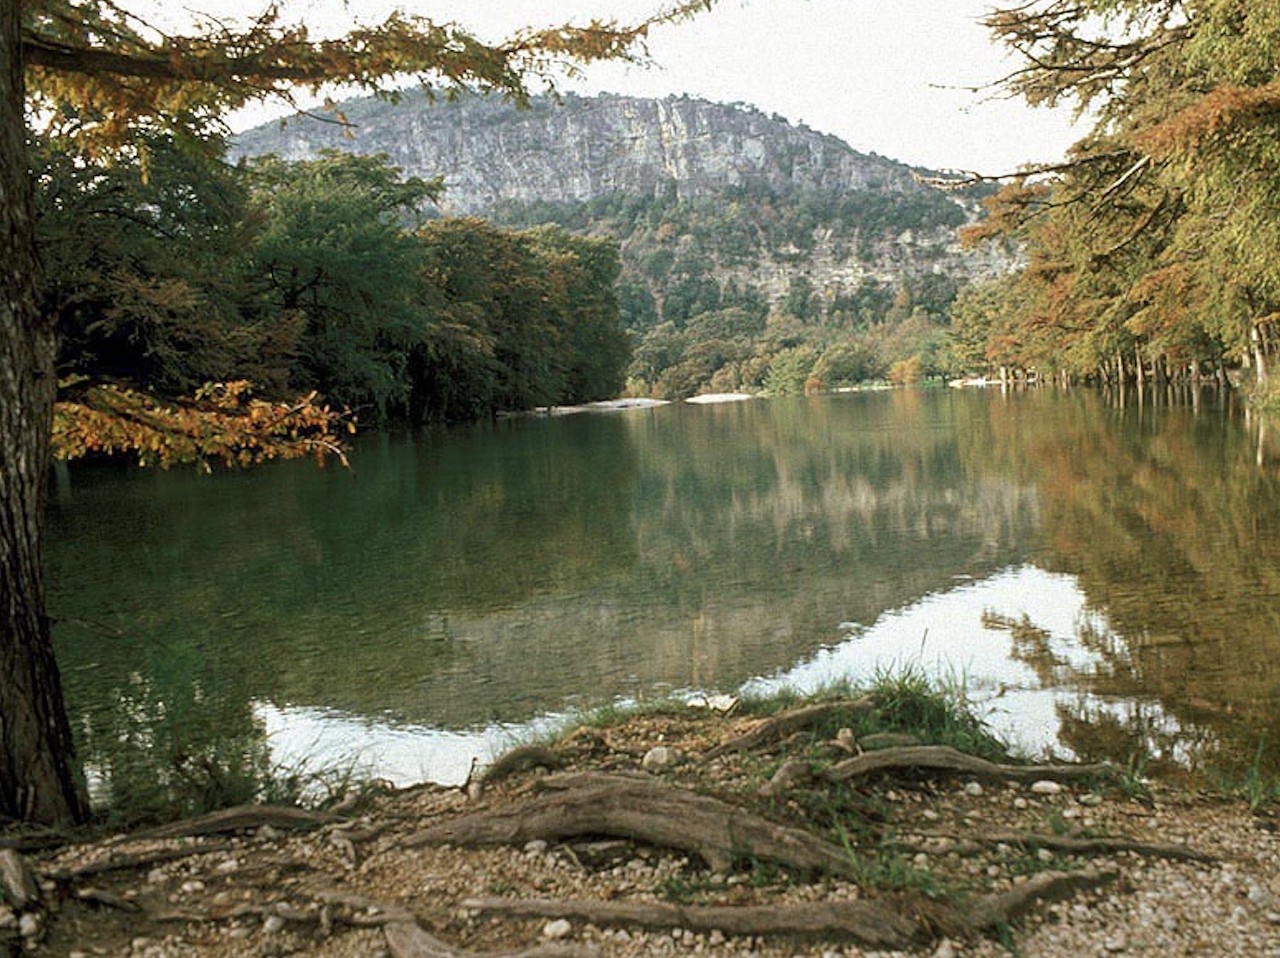 Garner State Park
234 R.R. 1050, Concan, (830) 232-6132, tpwd.texas.gov
Around two hours west of San Antonio, Garner State Park lies in the small burg of Concan. Part of the beauty of Garner is its distance from large cities. Campers can relish in the lessened light pollution, perfect for stargazing. Stay into the evenings and join fellow campers for a summer jukebox dance by the park’s concession building.